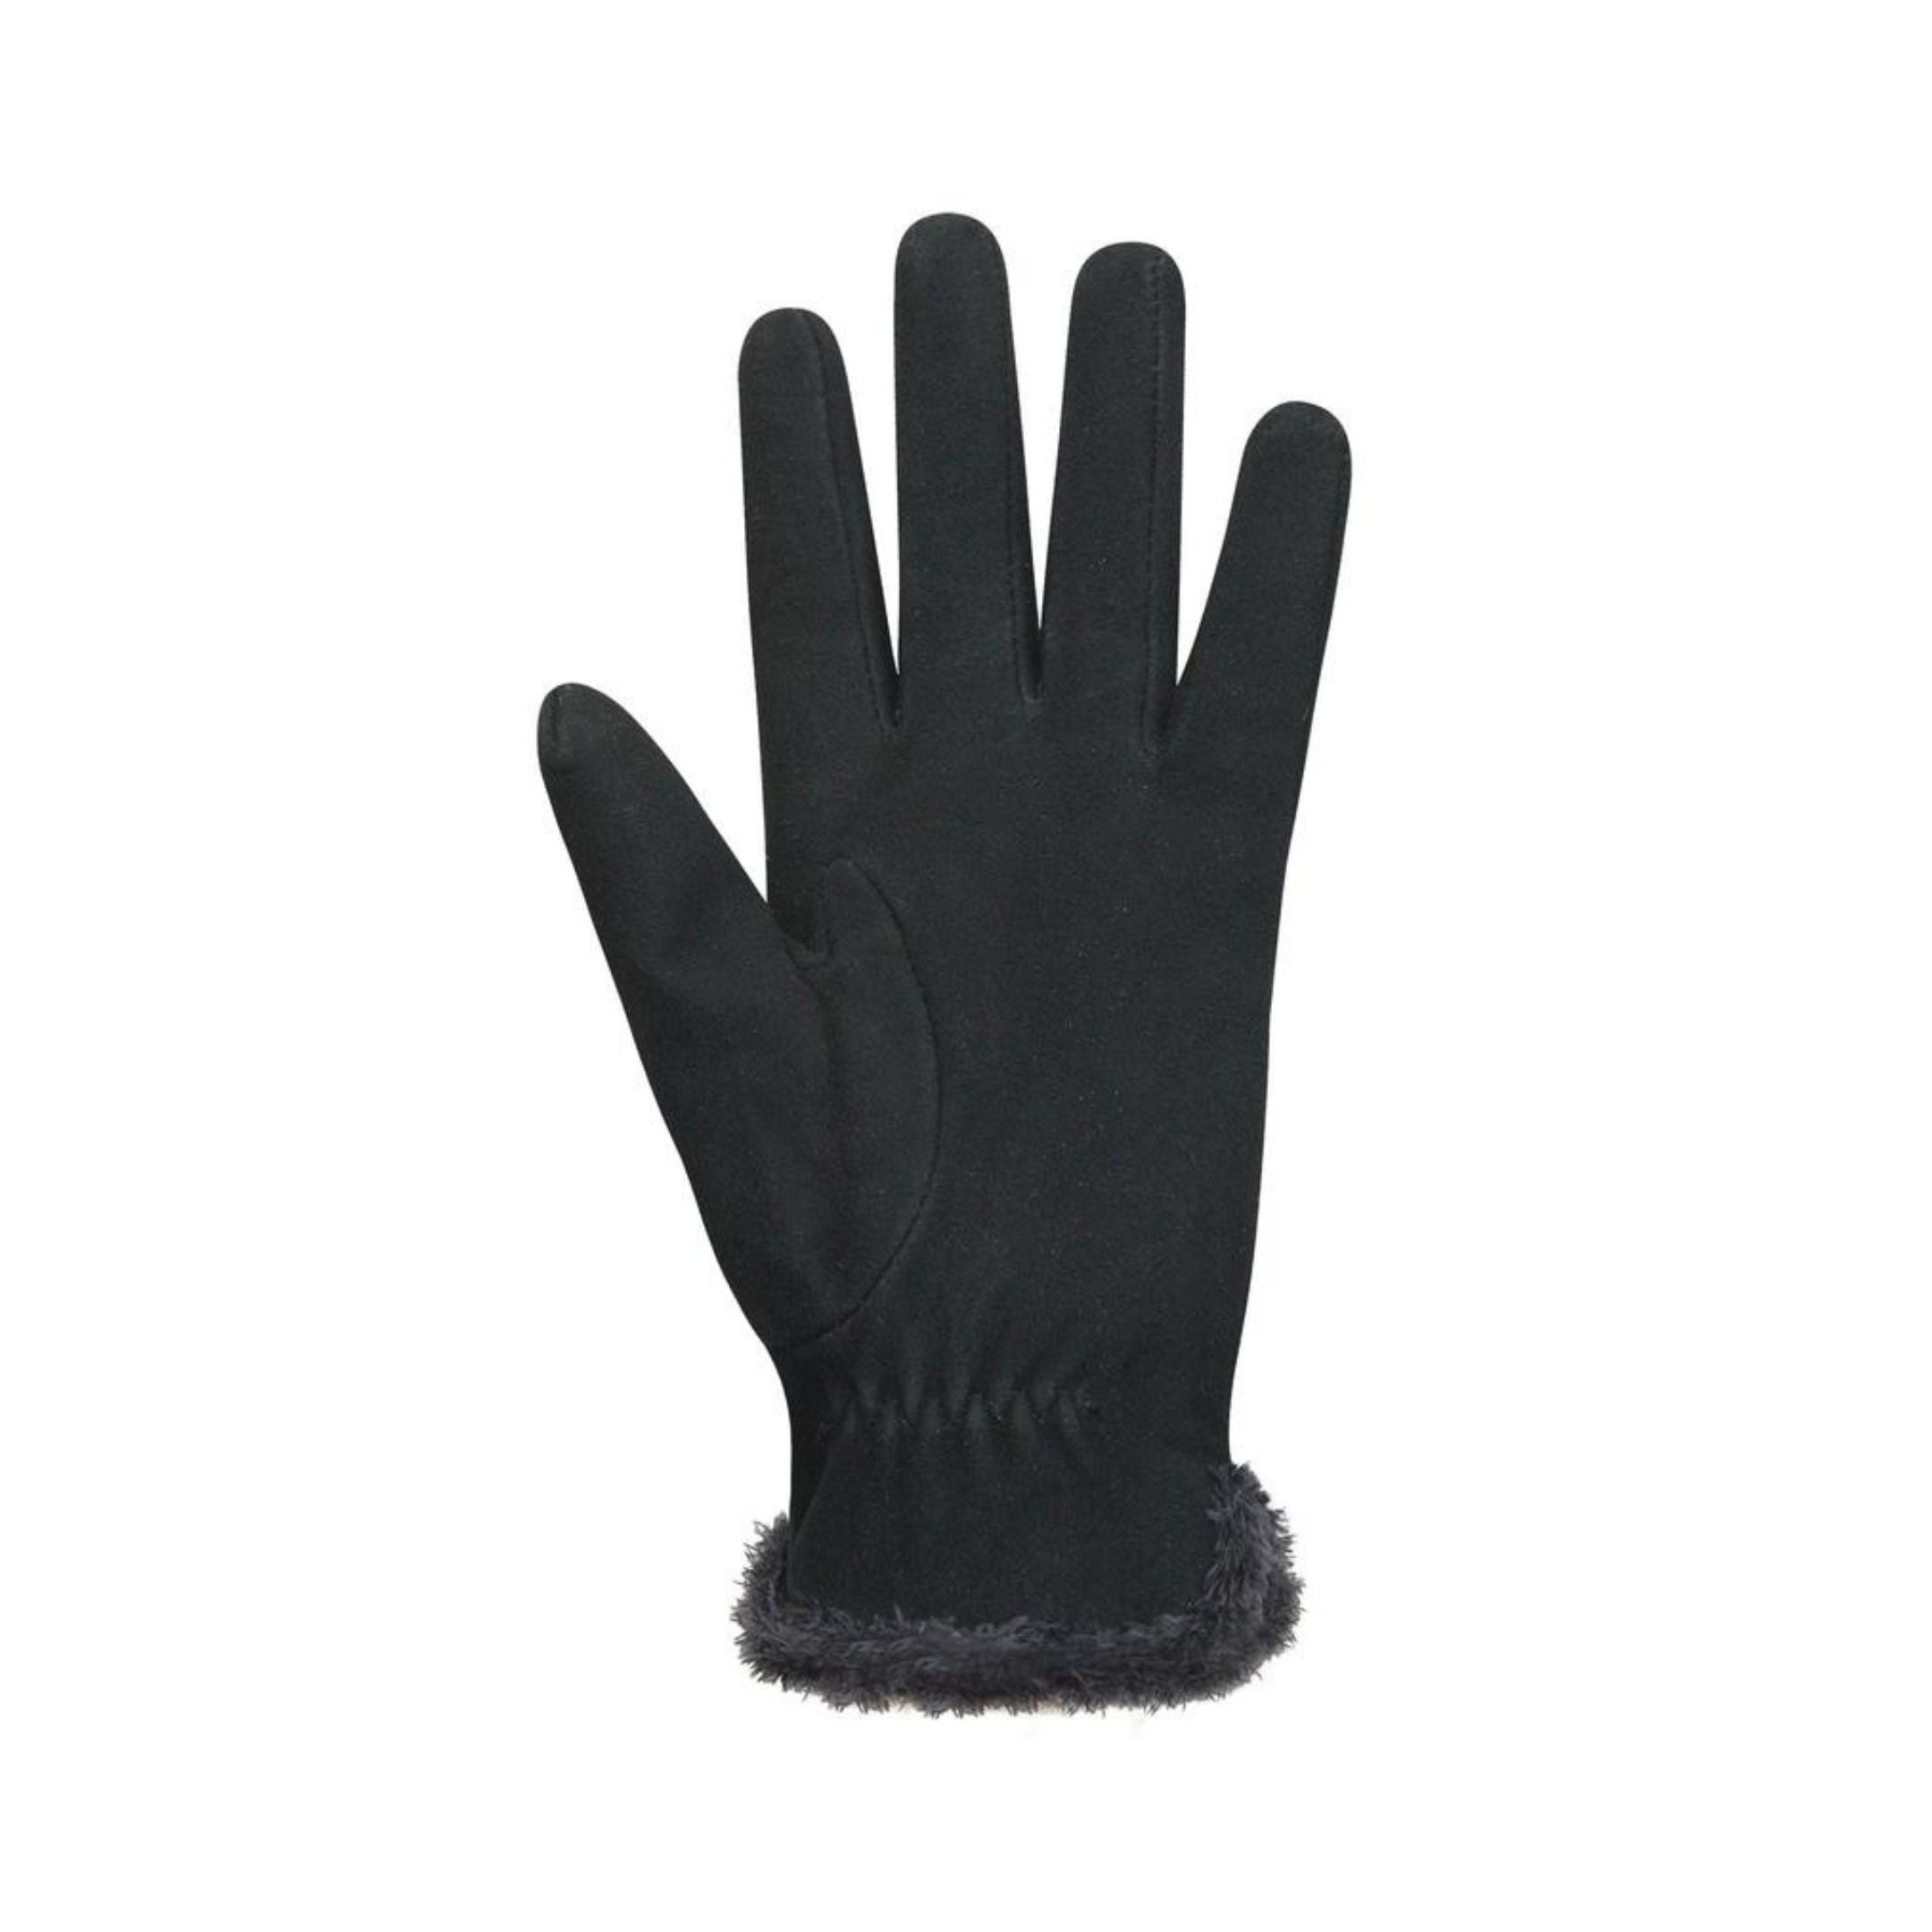 Palm side of fabric black finger gloves with thin fur trim at cuff